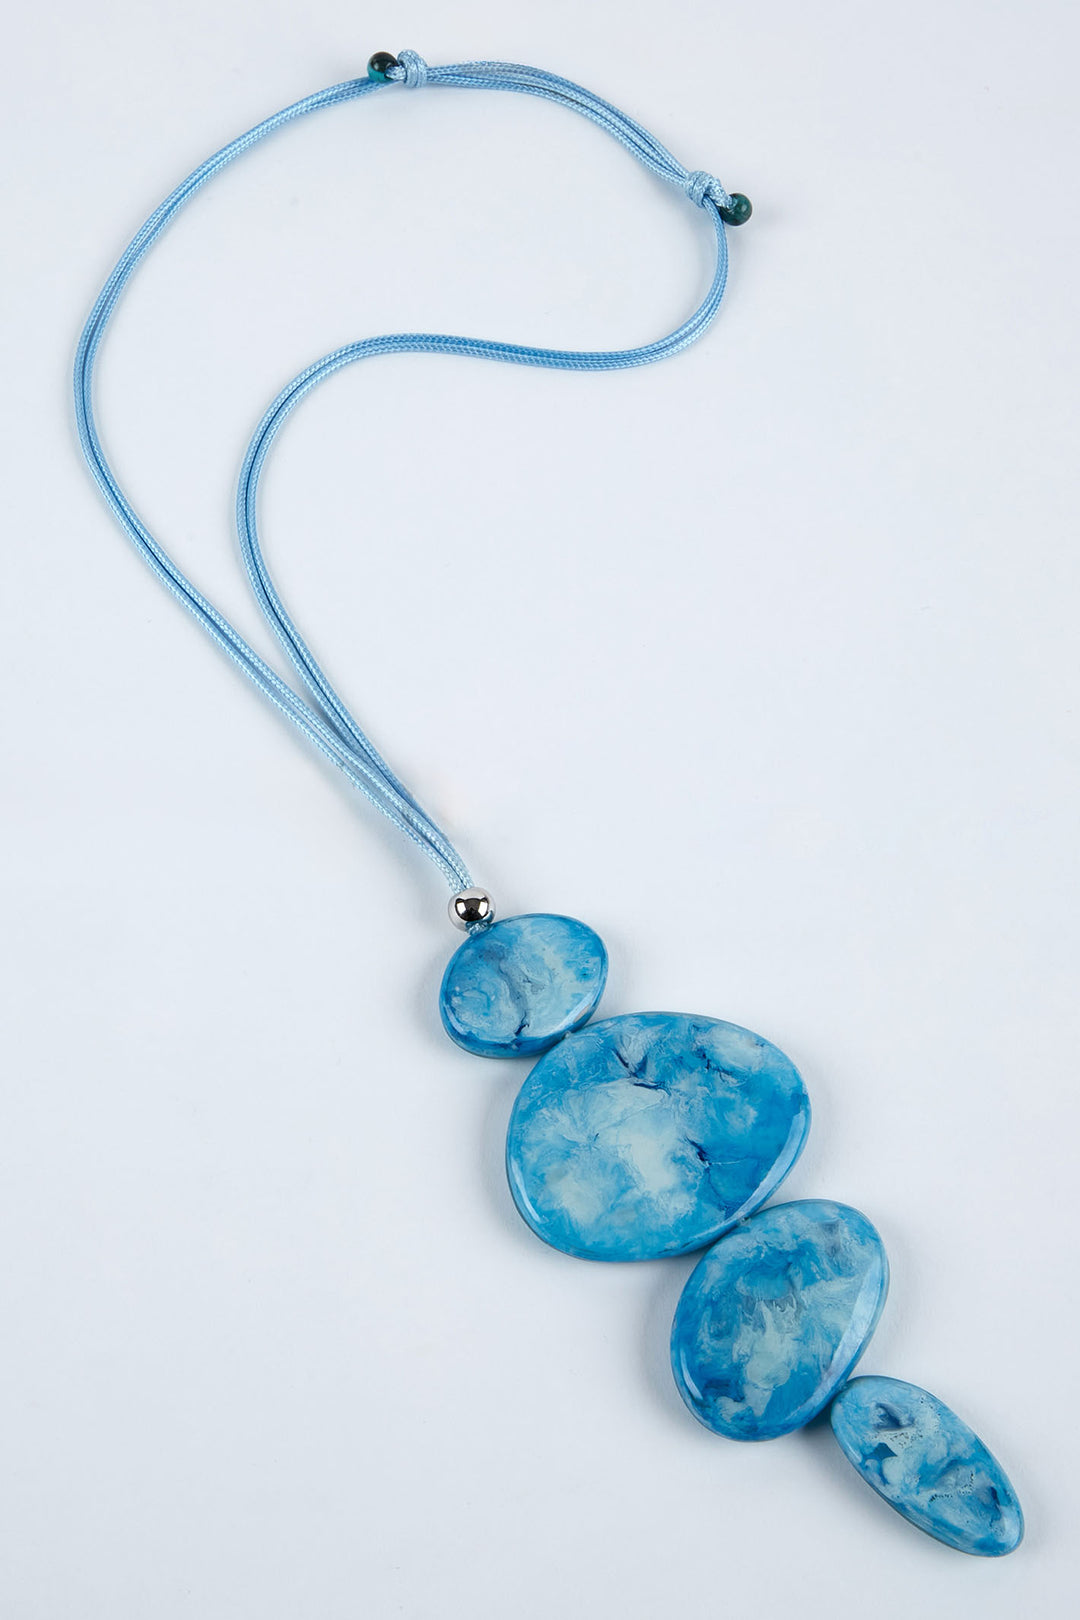 Dante NL70746 Blue Marbled Stone Necklace - Experience Boutique